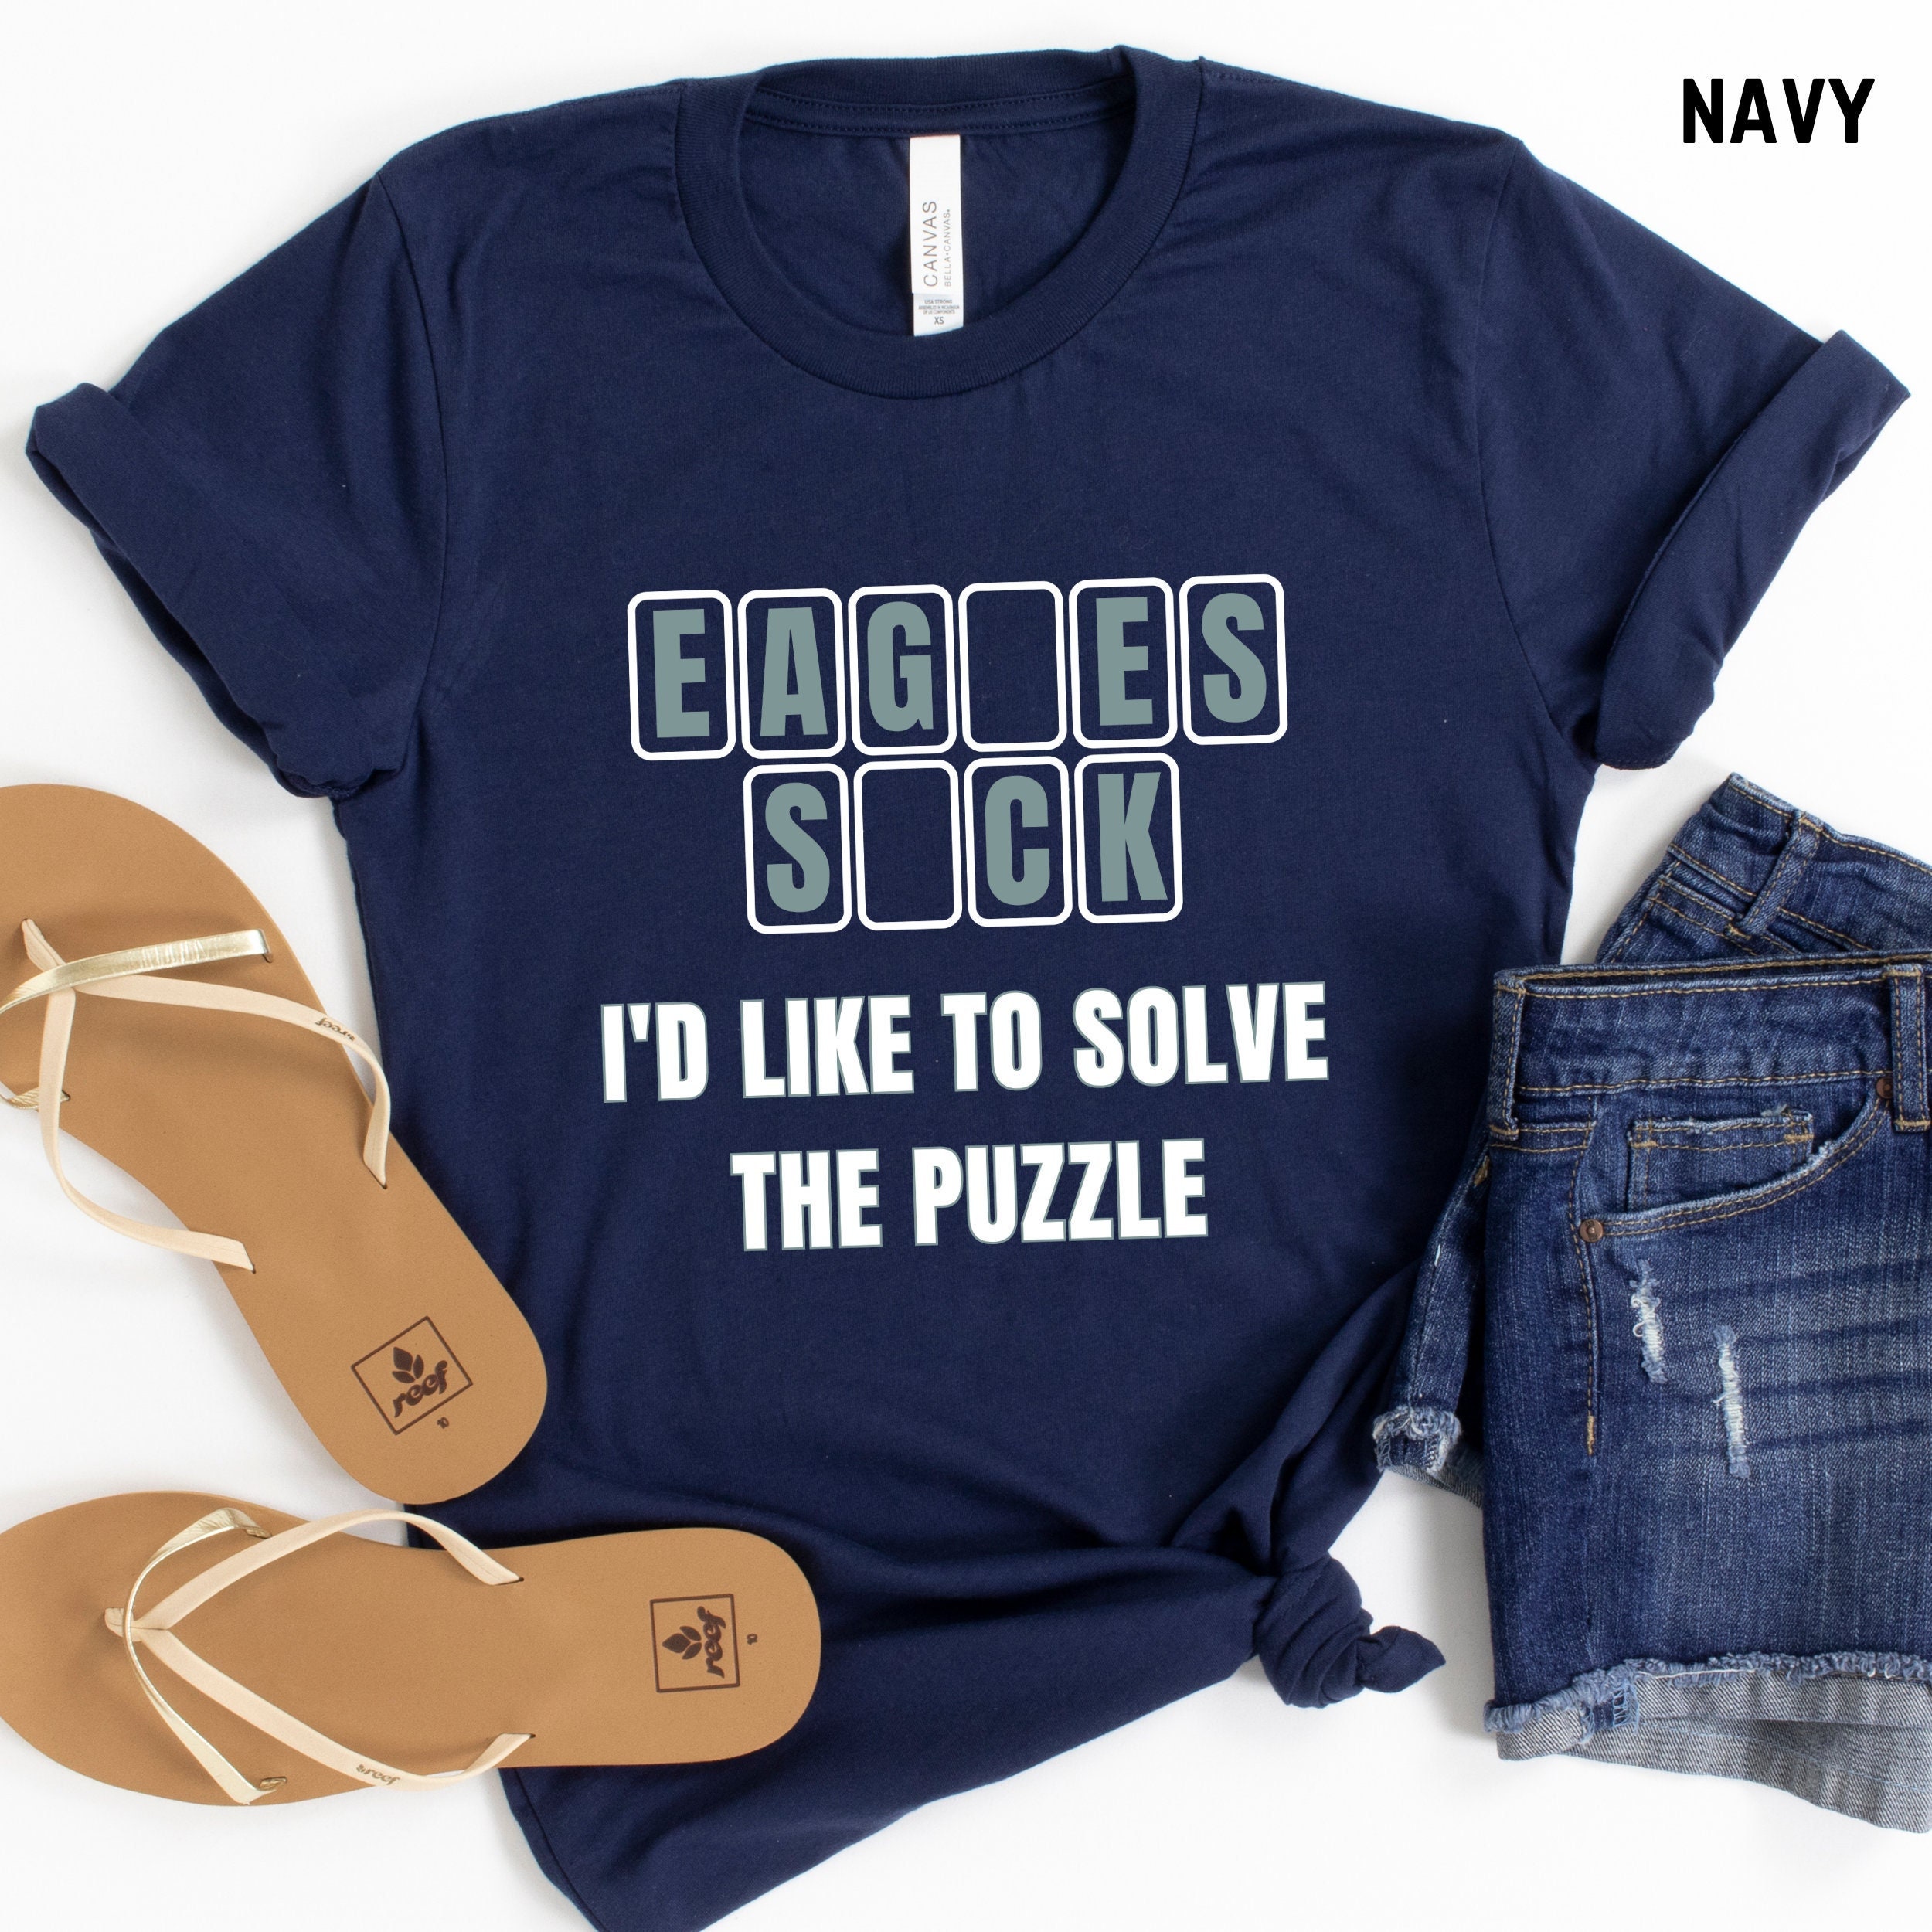 The Night The Star Burns Out Vs Cowboys Eagles Shirt - Teebreat